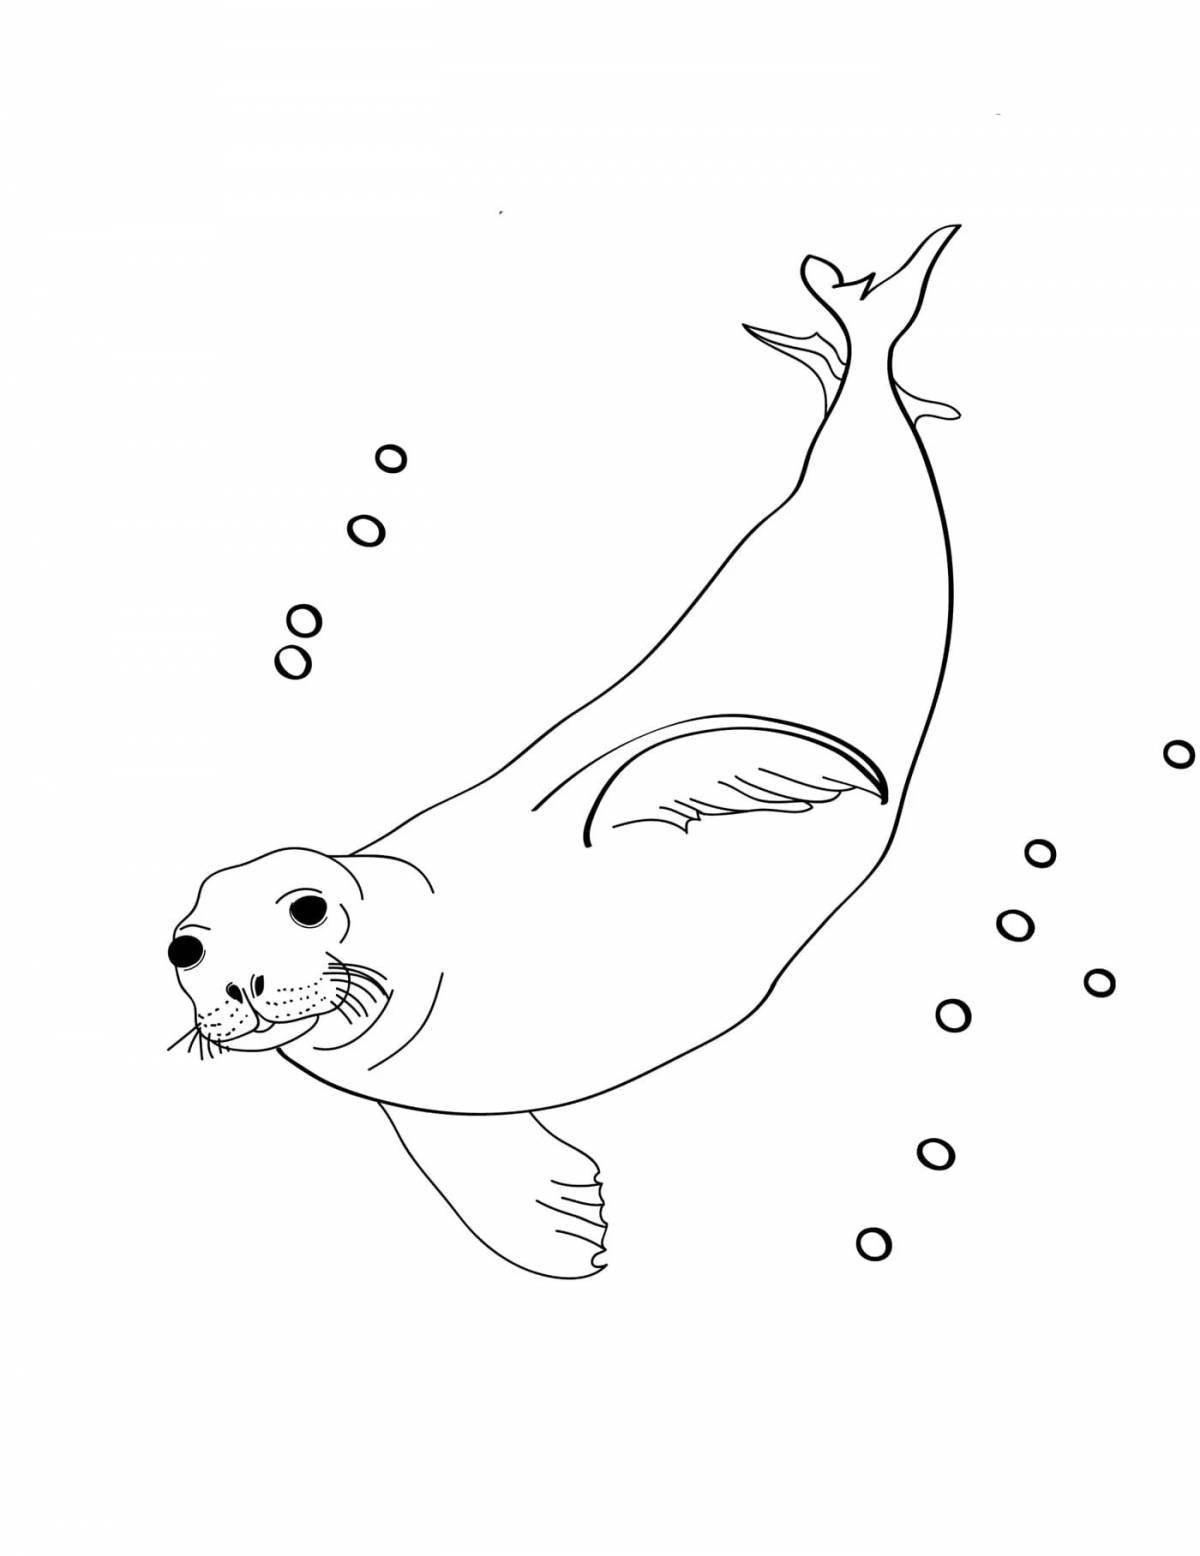 A fun sea lion coloring book for kids